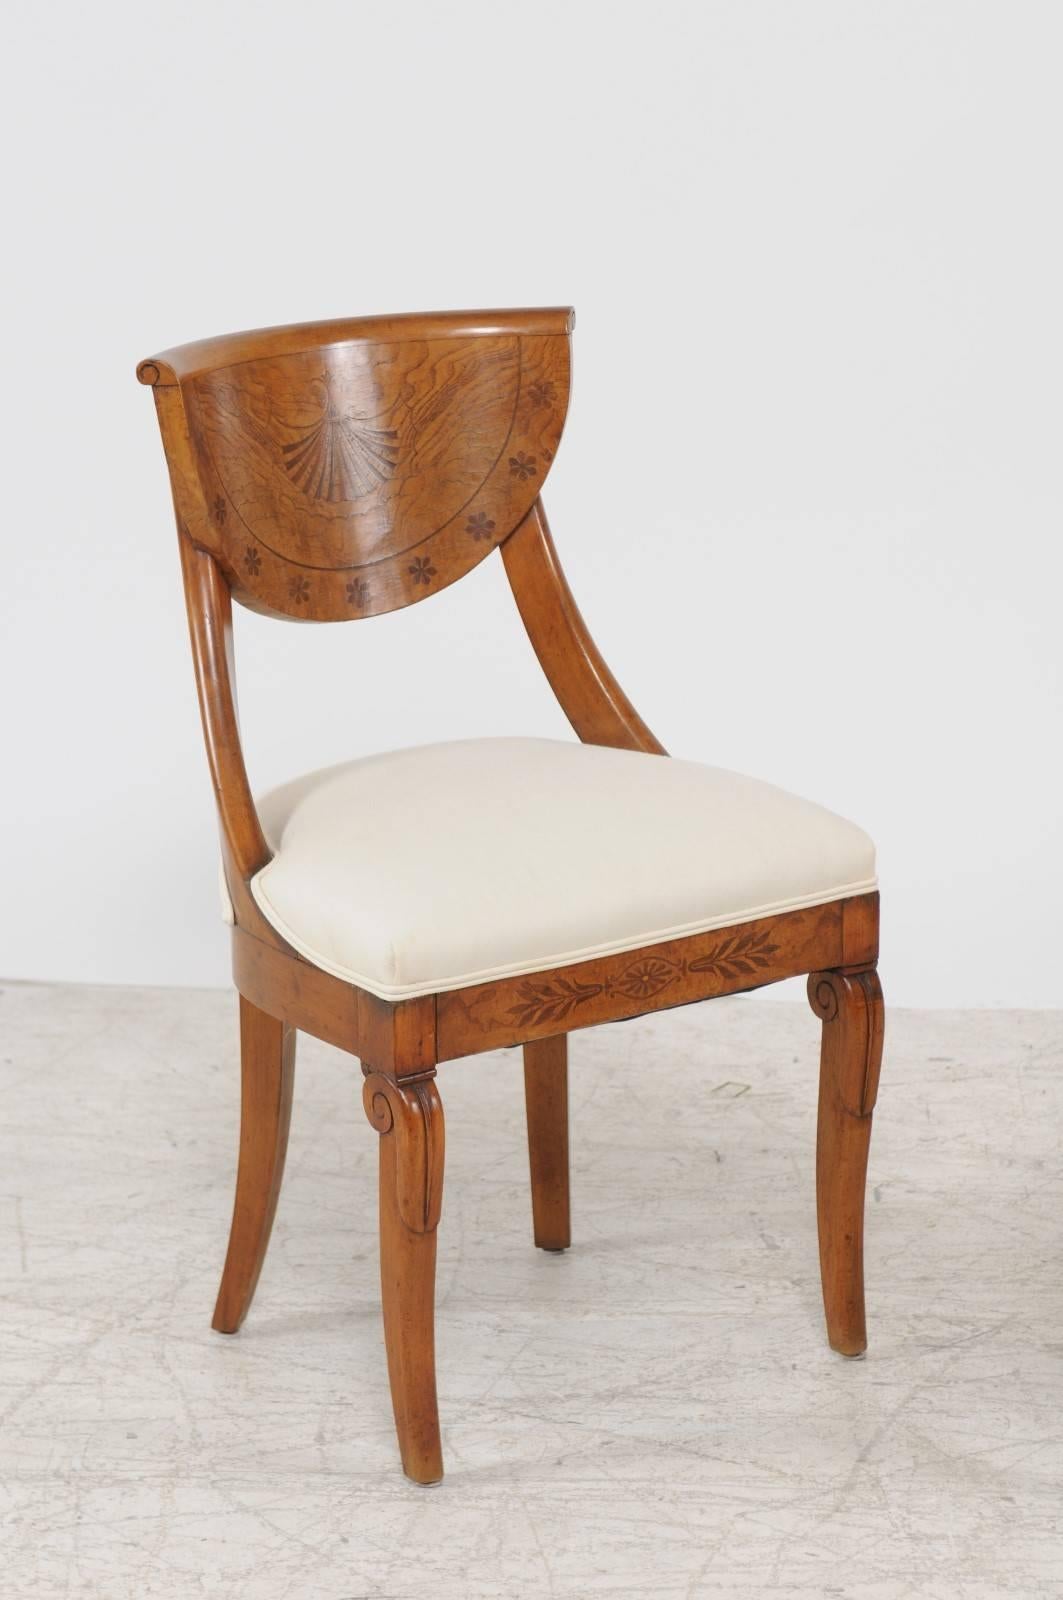 Veneer Pair of 1840s Austrian Biedermeier Upholstered Side Chairs with Marquetry Décor